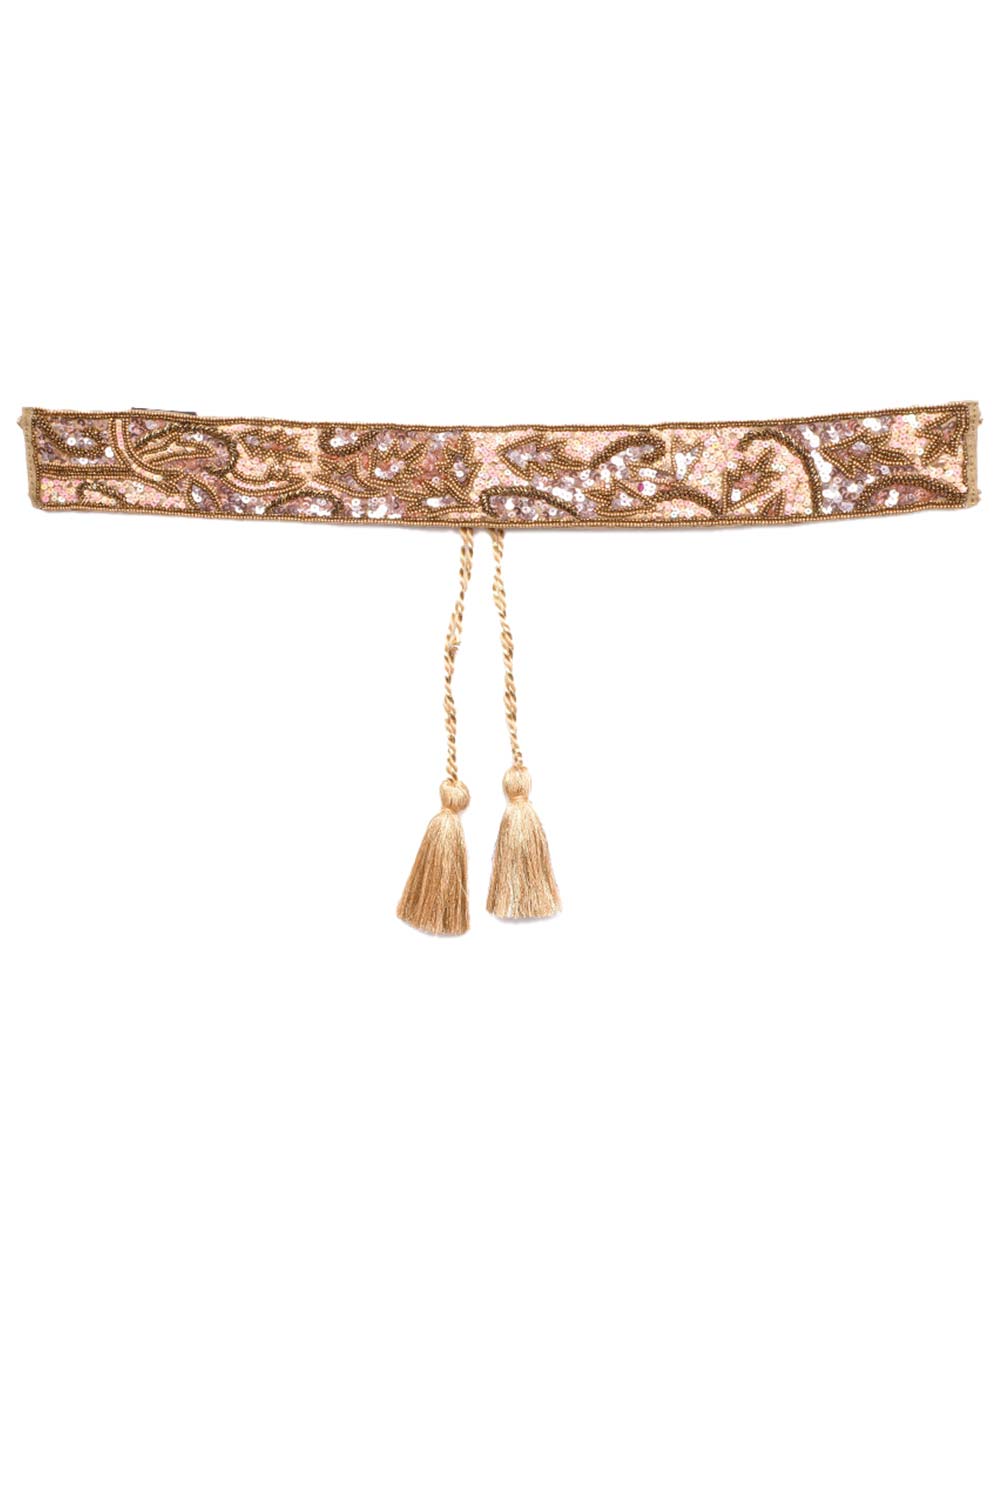 Buy Abstract Sequined Waist Belt in Antique Gold & Multi Online